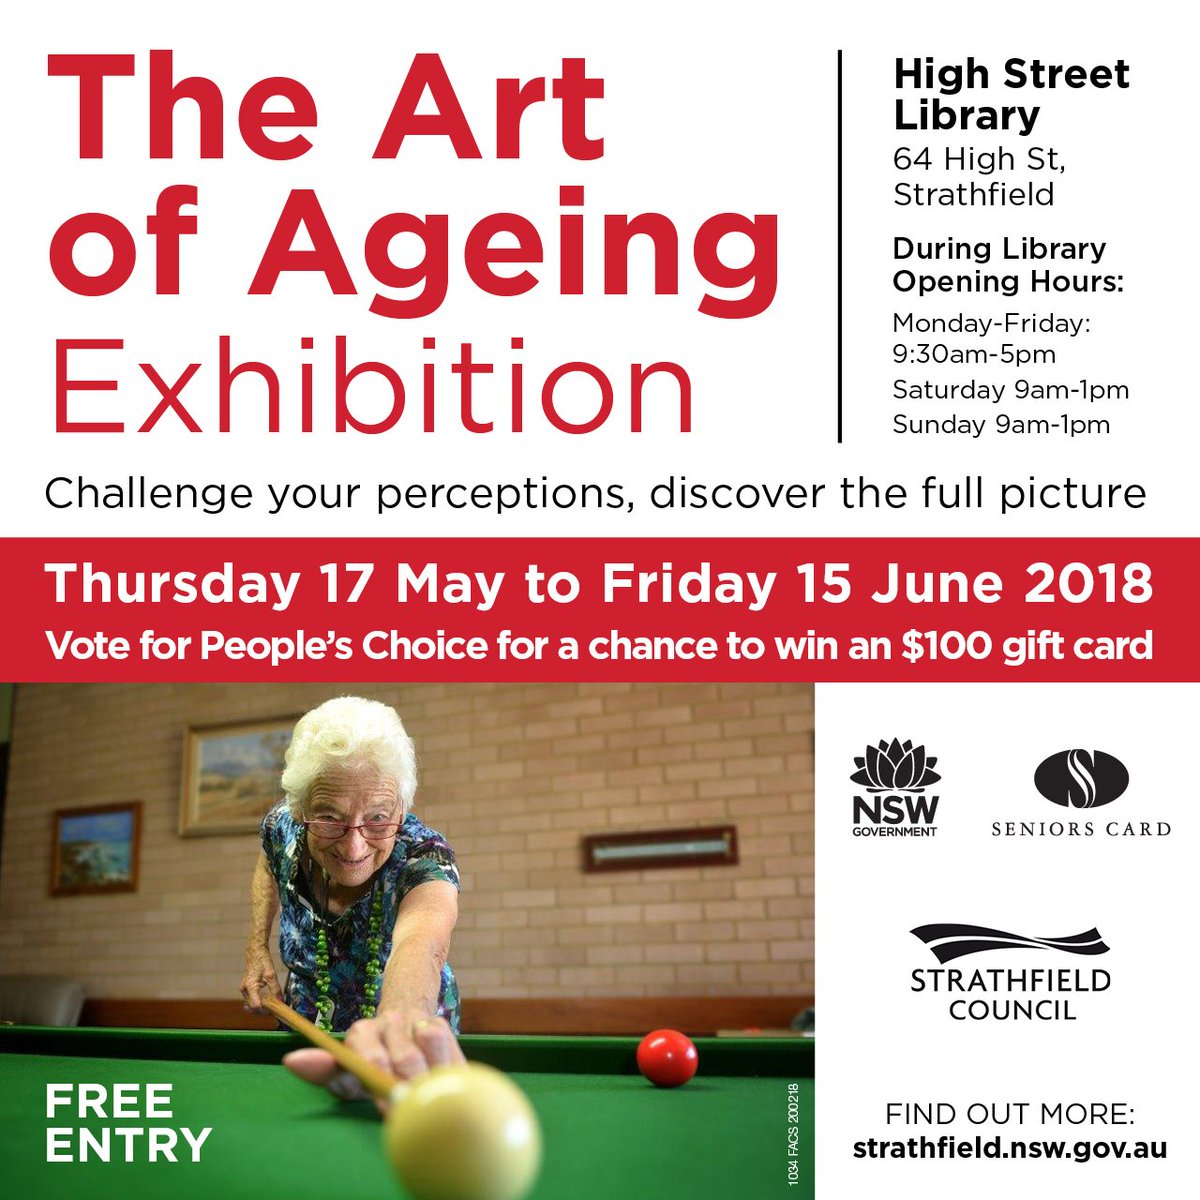 Challenge your perceptions and head to the #ArtofAgeing Exhibition at High St Library. Free from 17 May ow.ly/aAEn30jLyD6